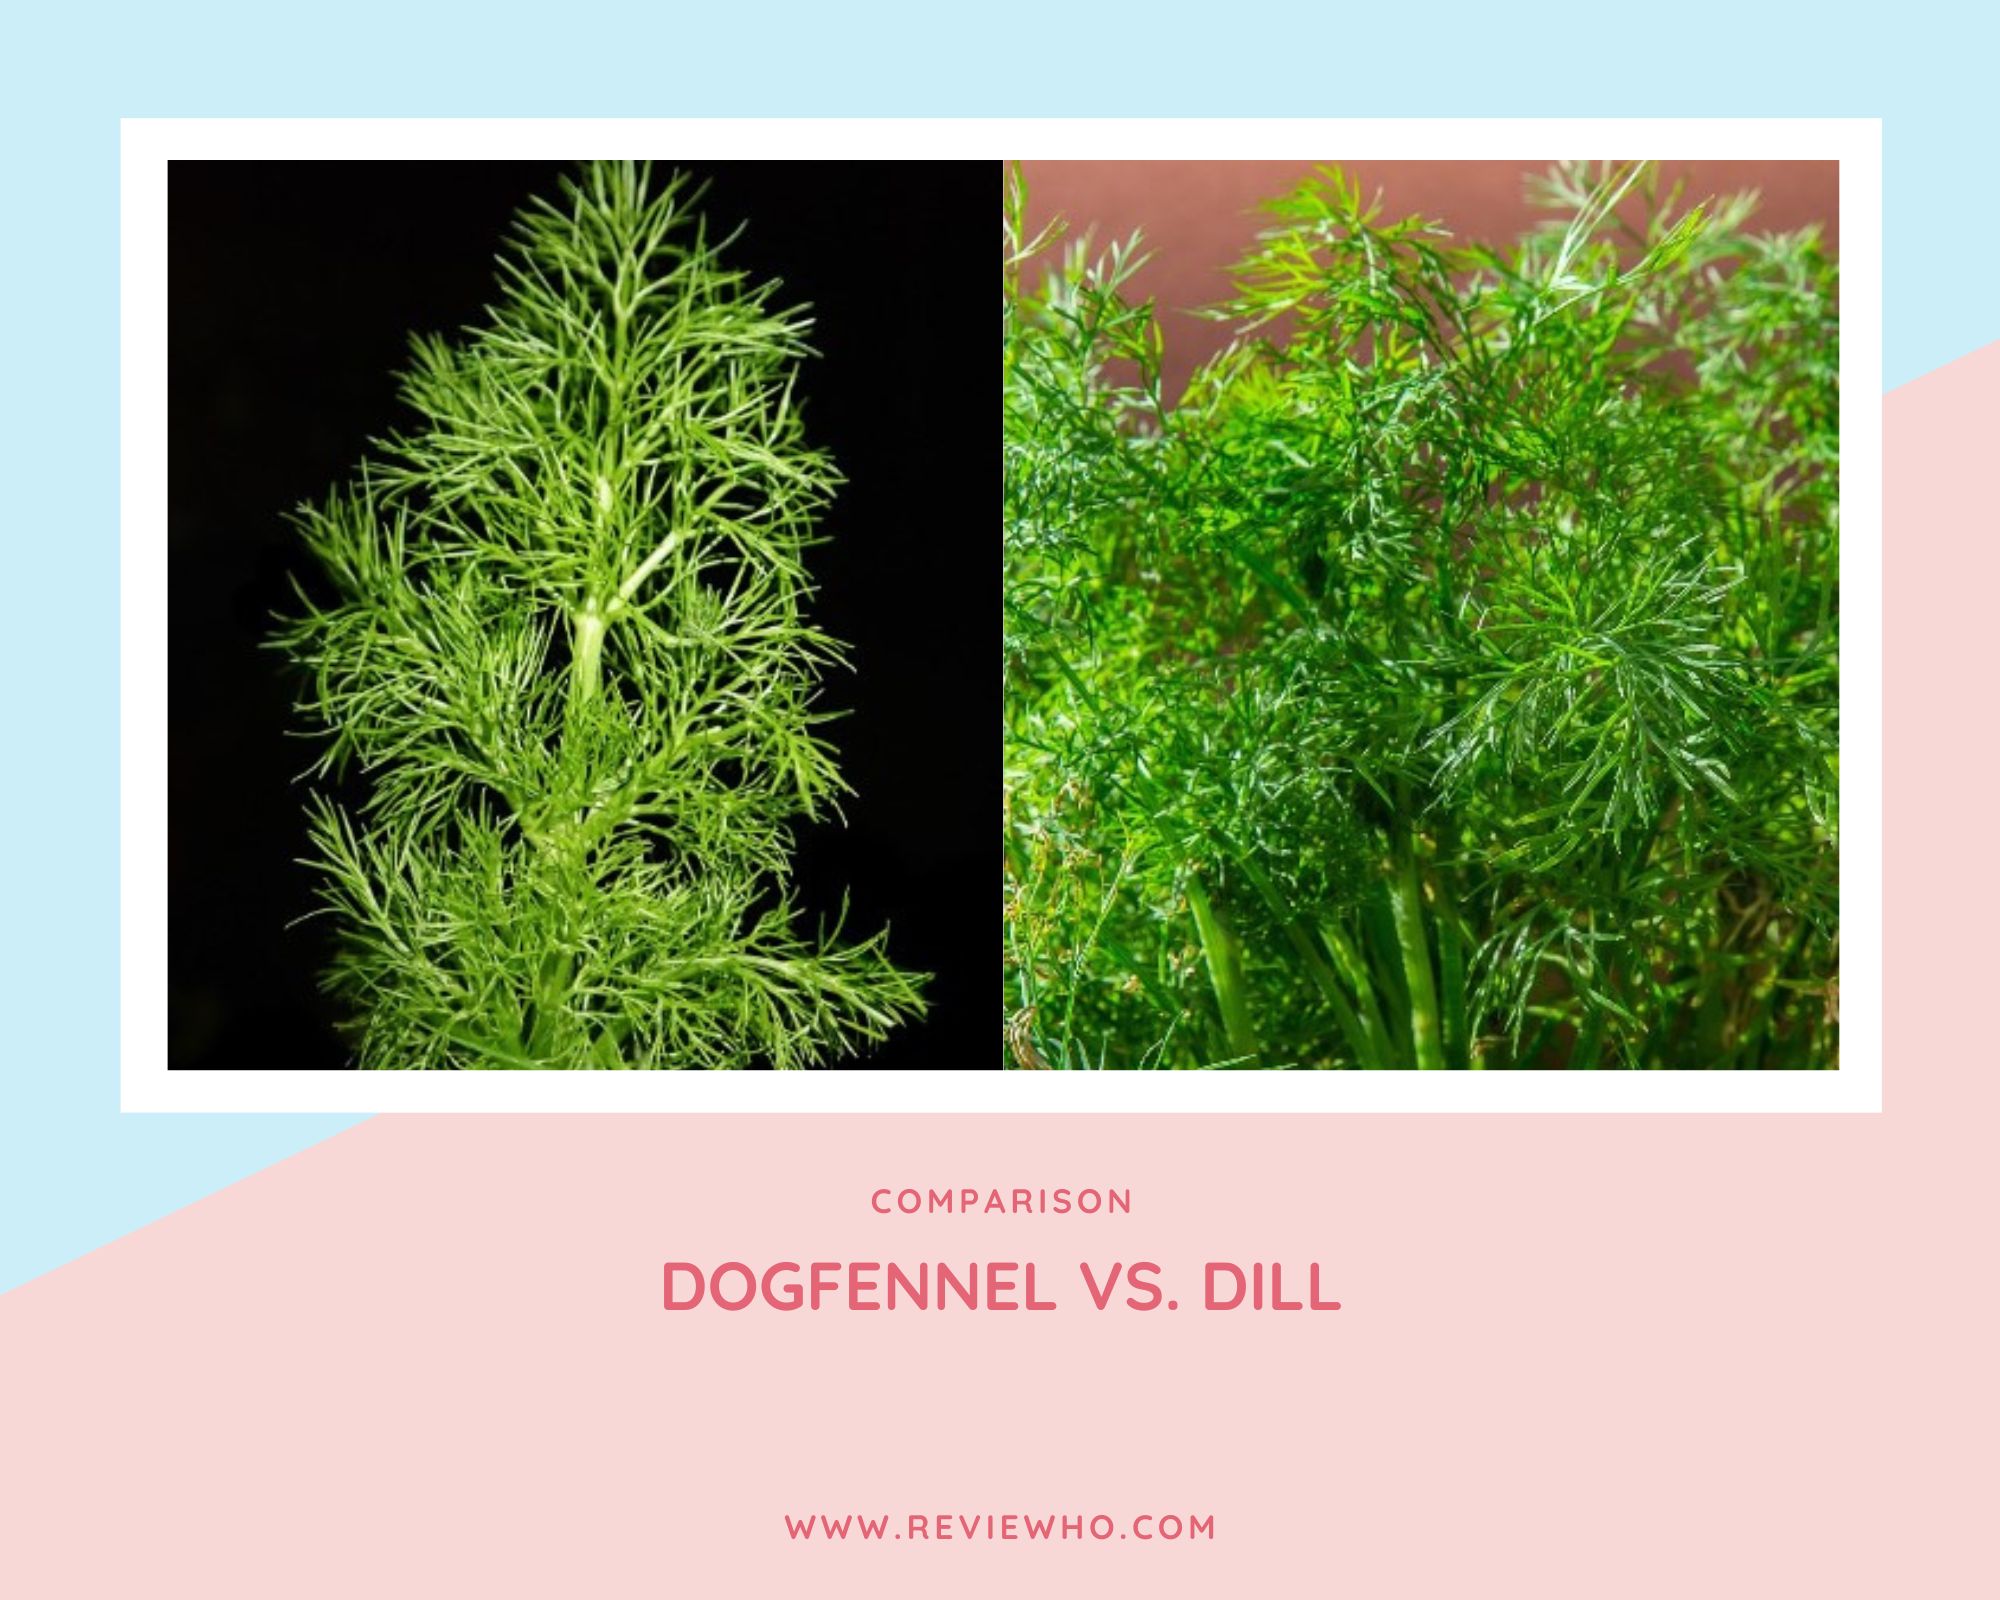 Difference Between Dogfennel and Dill